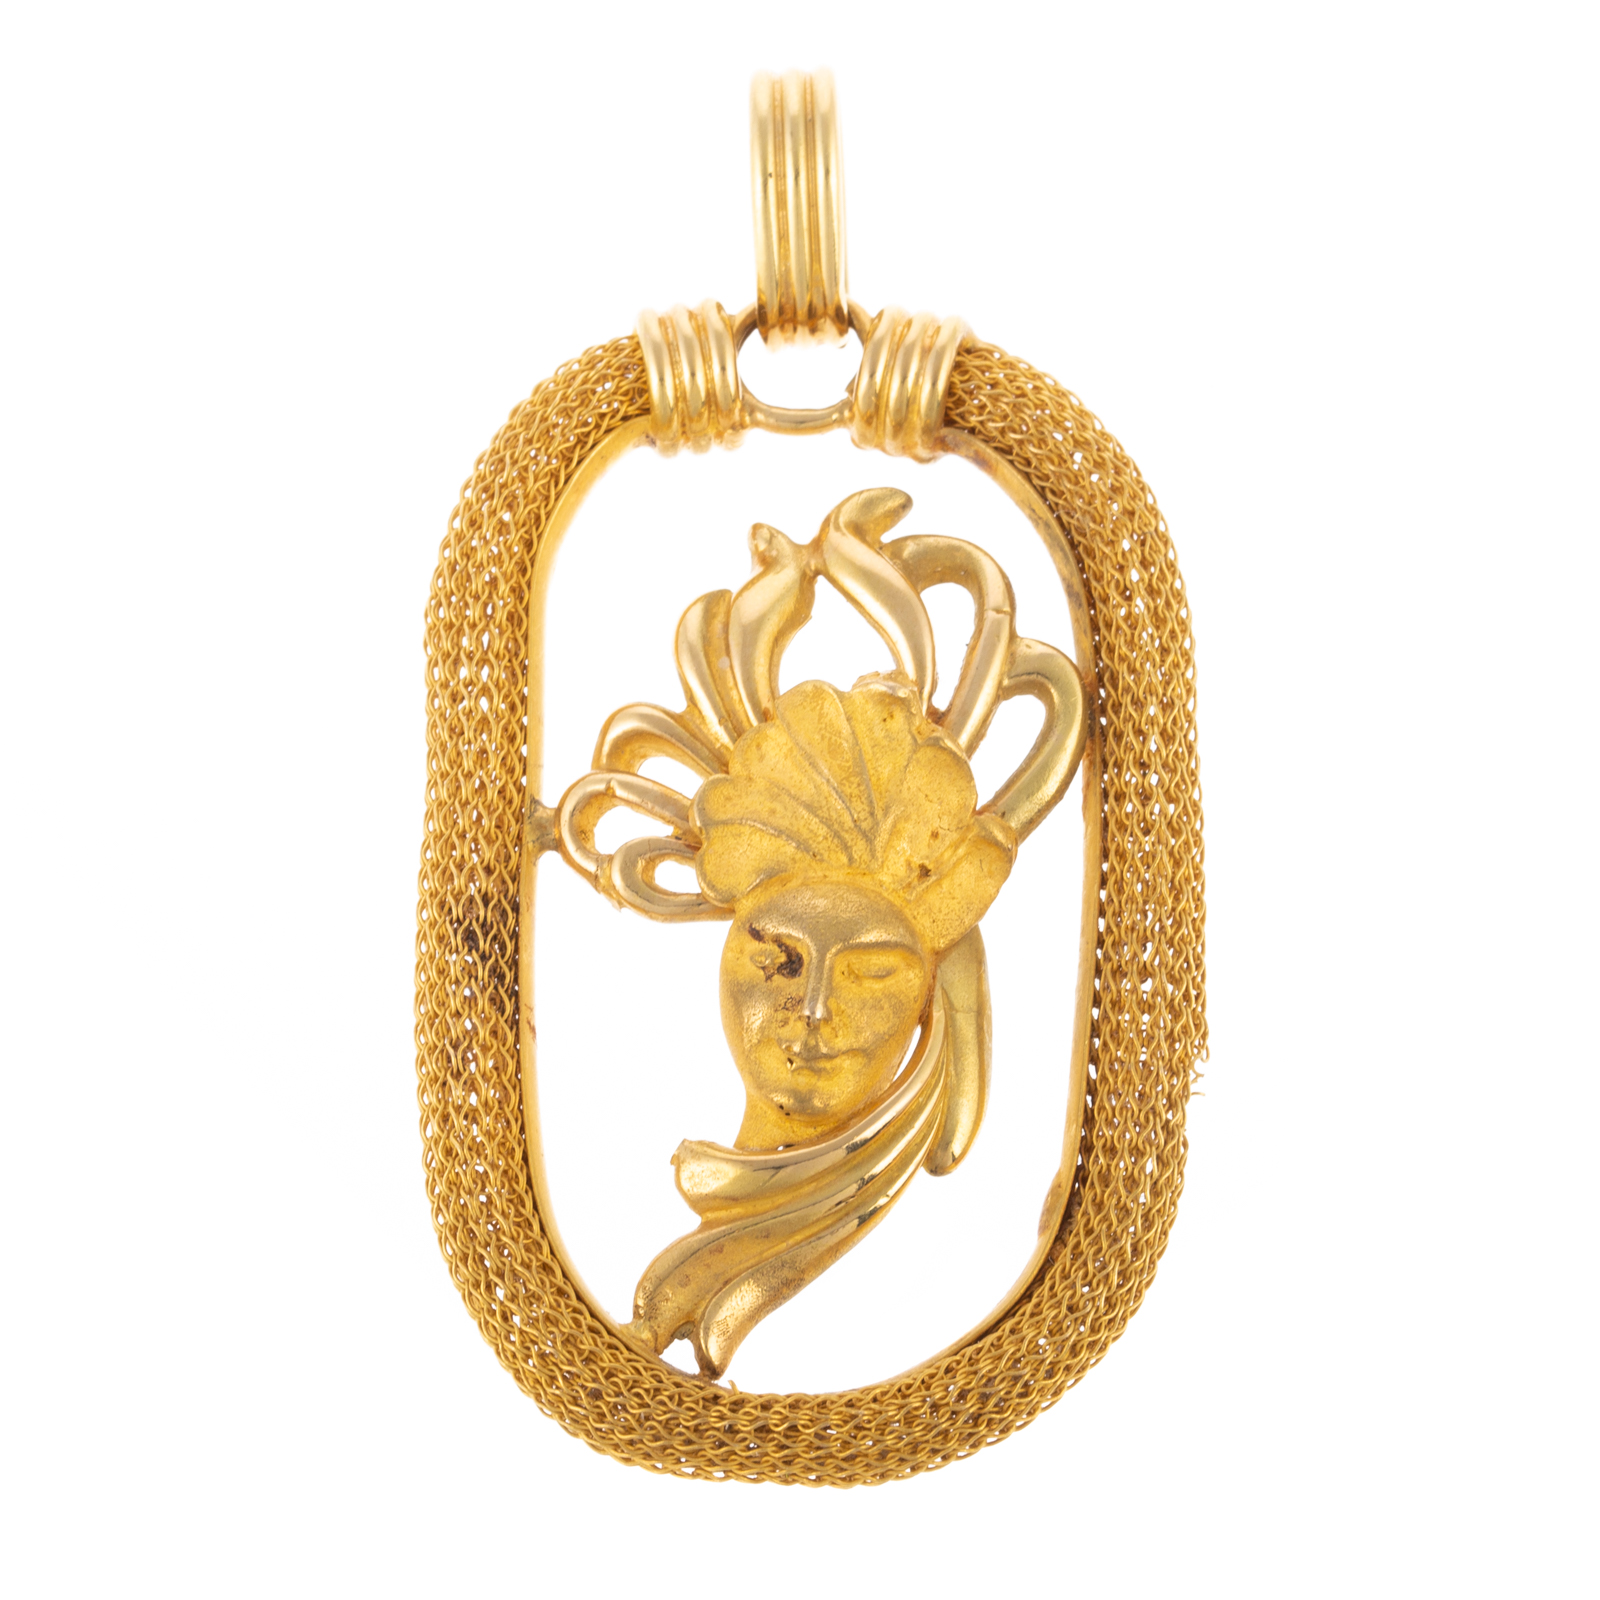 A LARGE 18K PENDANT OF WOMAN'S